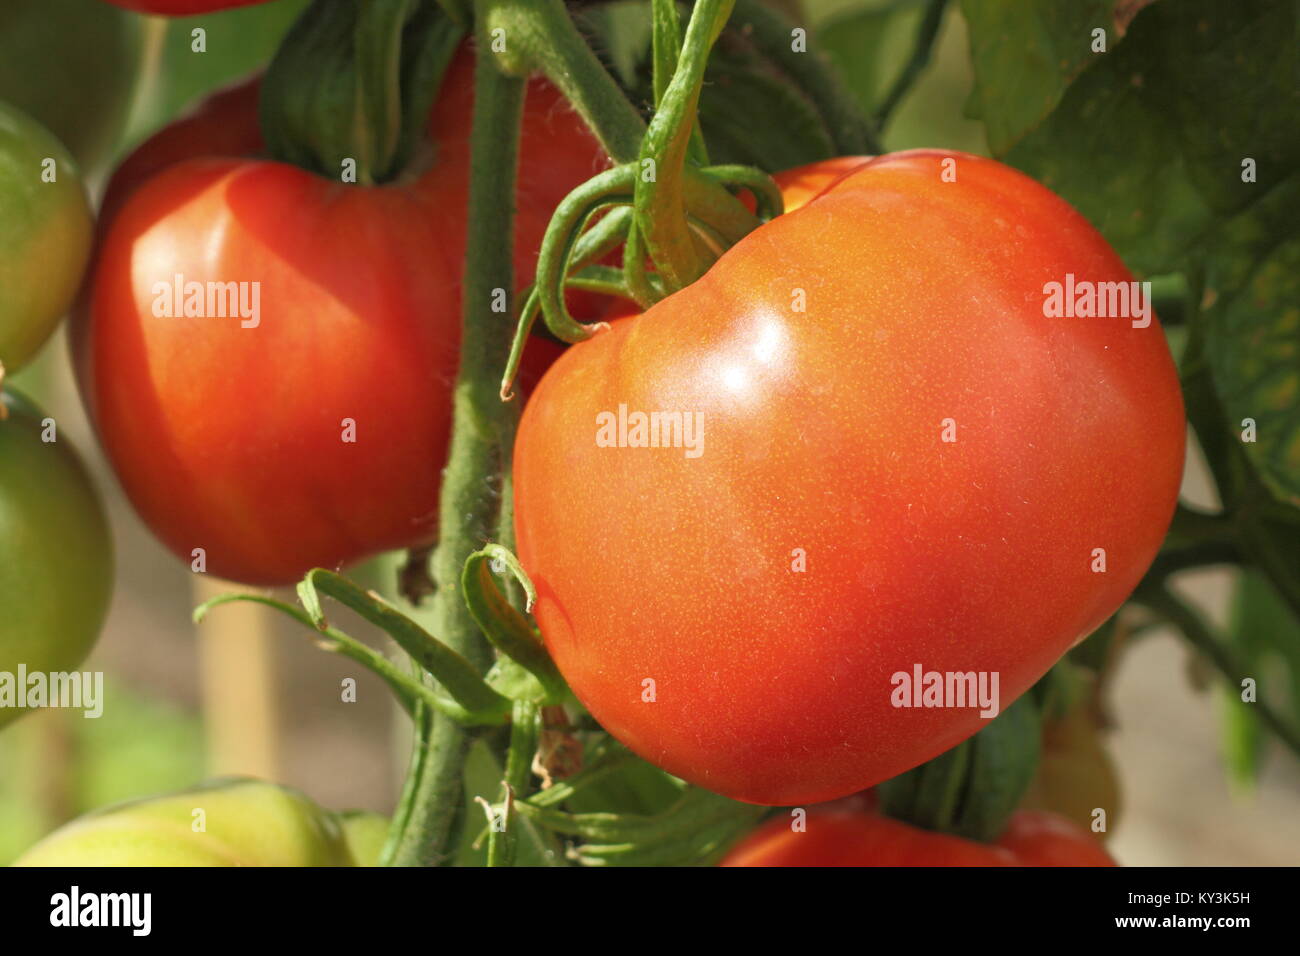 'Boxcar Willie', an American heirloom beefsteak tomato variety (Solanum lycopersicum), growing on a tomato plant vine in a greenhouse, England, UK Stock Photo